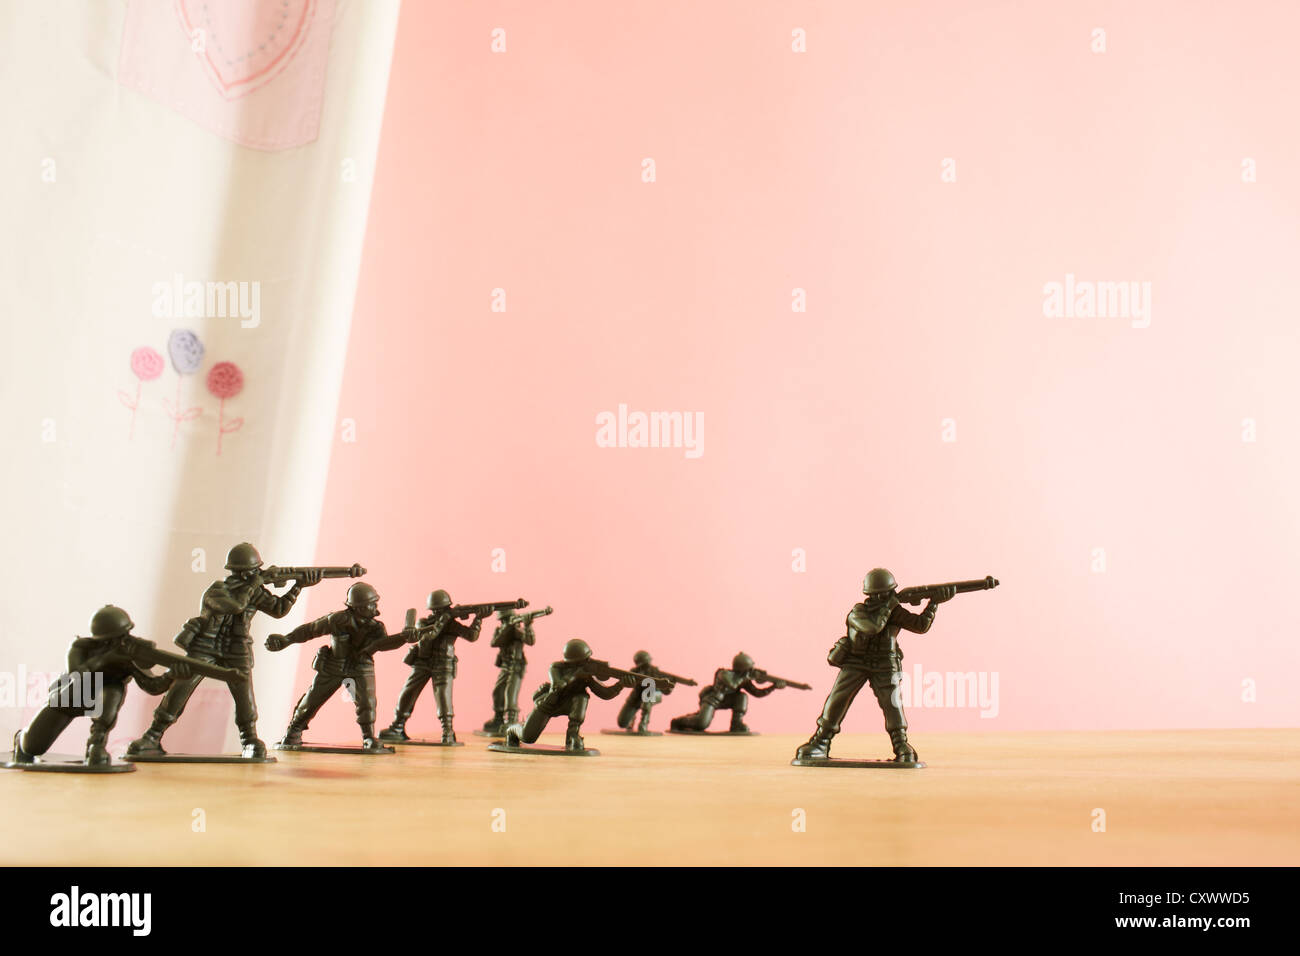 Toy soldiers waiting for unseen danger Stock Photo